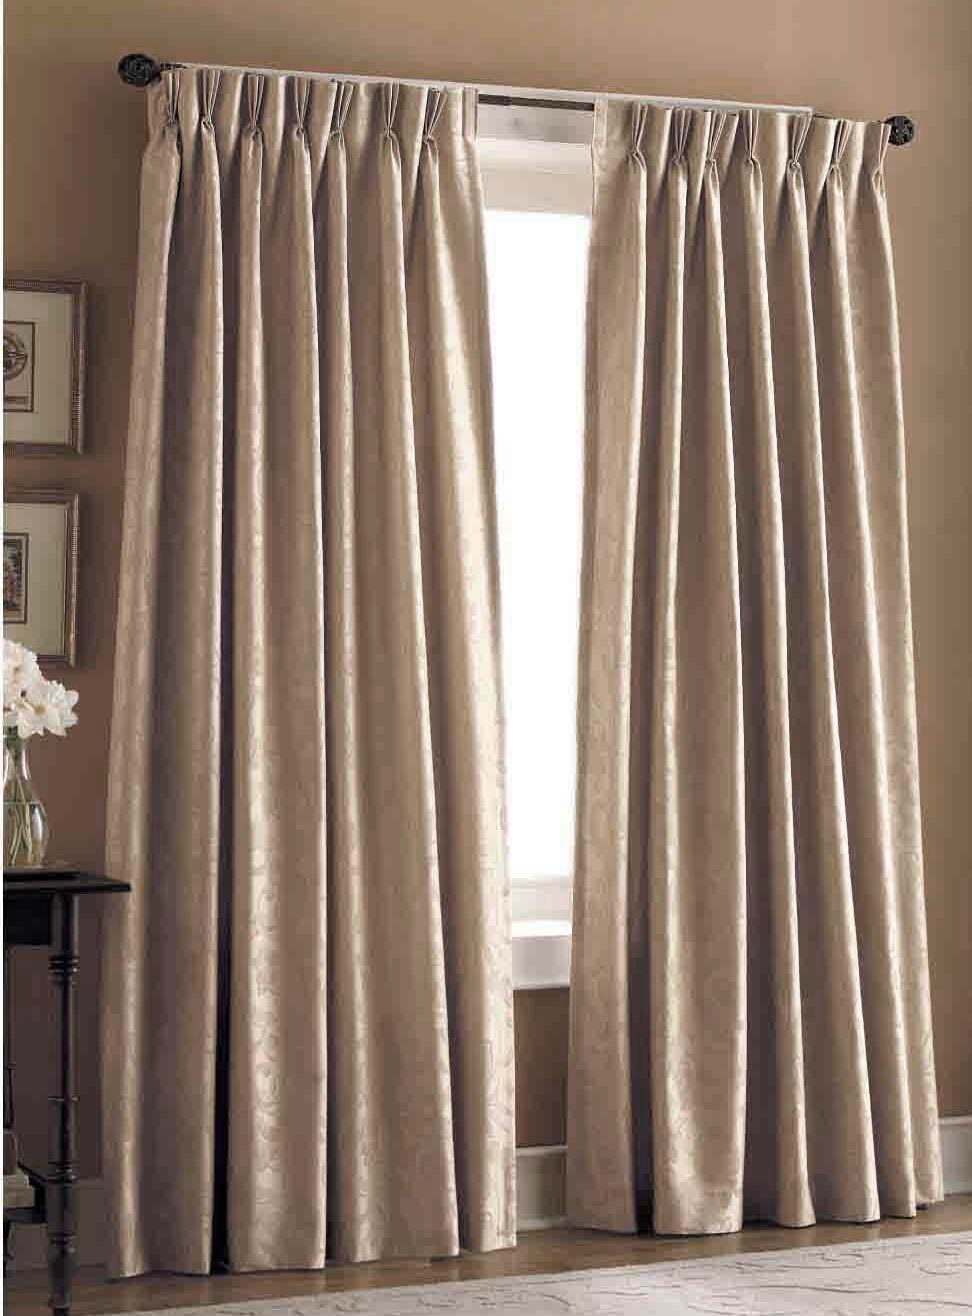 What Is Pinch Pleat Curtains Pinch Pleat Drapes 63